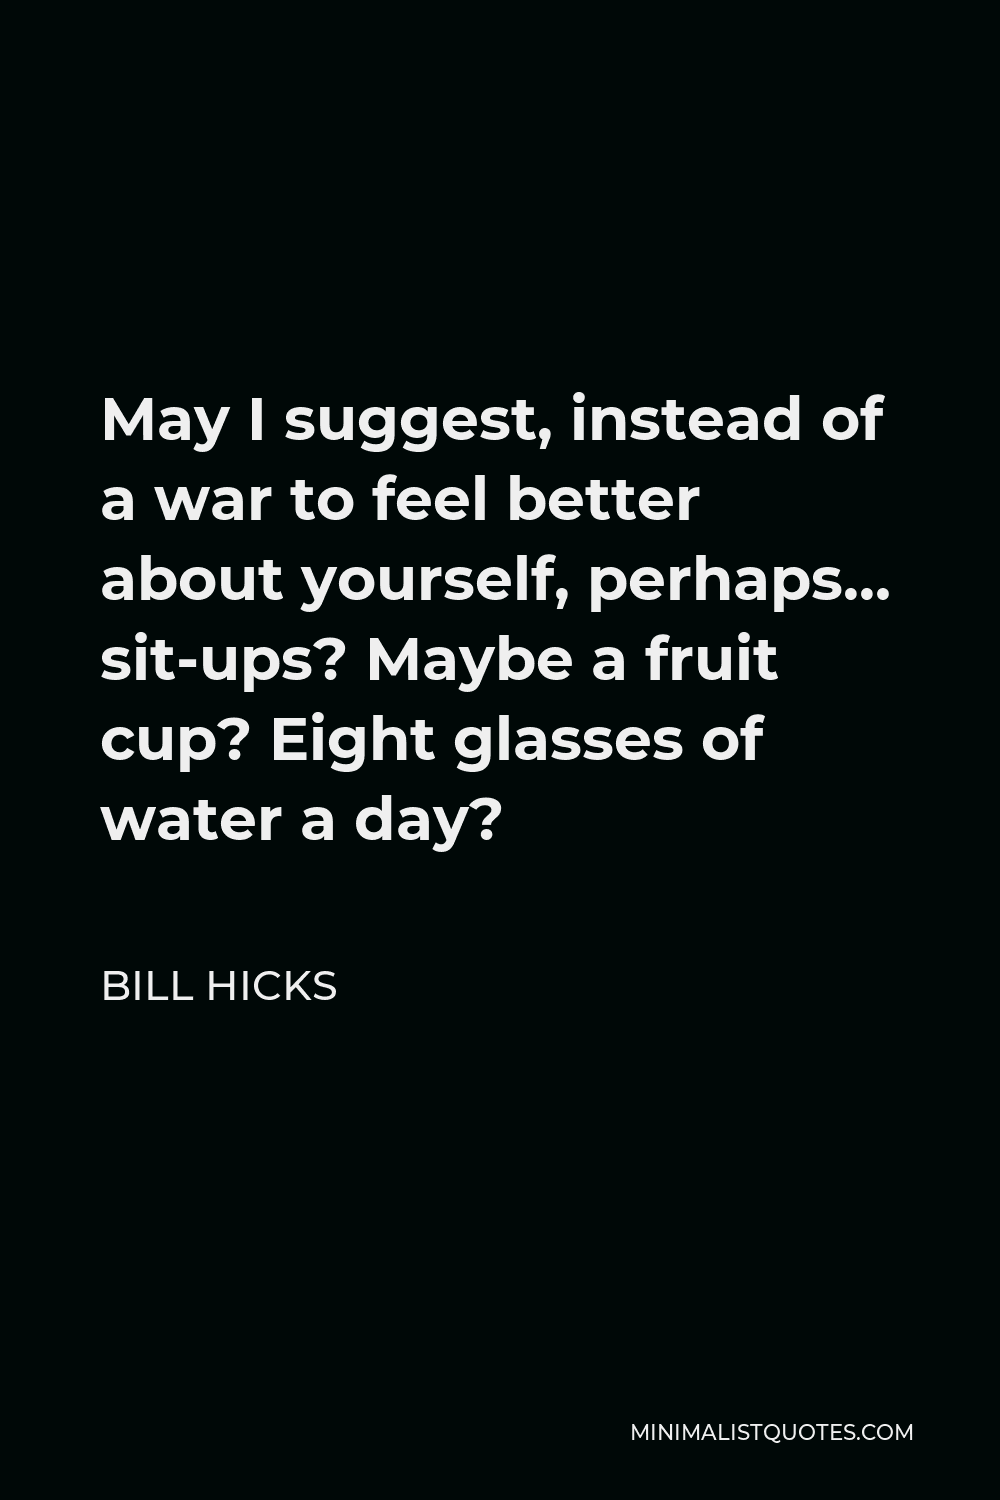 Bill Hicks Quote - May I suggest, instead of a war to feel better about yourself, perhaps… sit-ups? Maybe a fruit cup? Eight glasses of water a day?